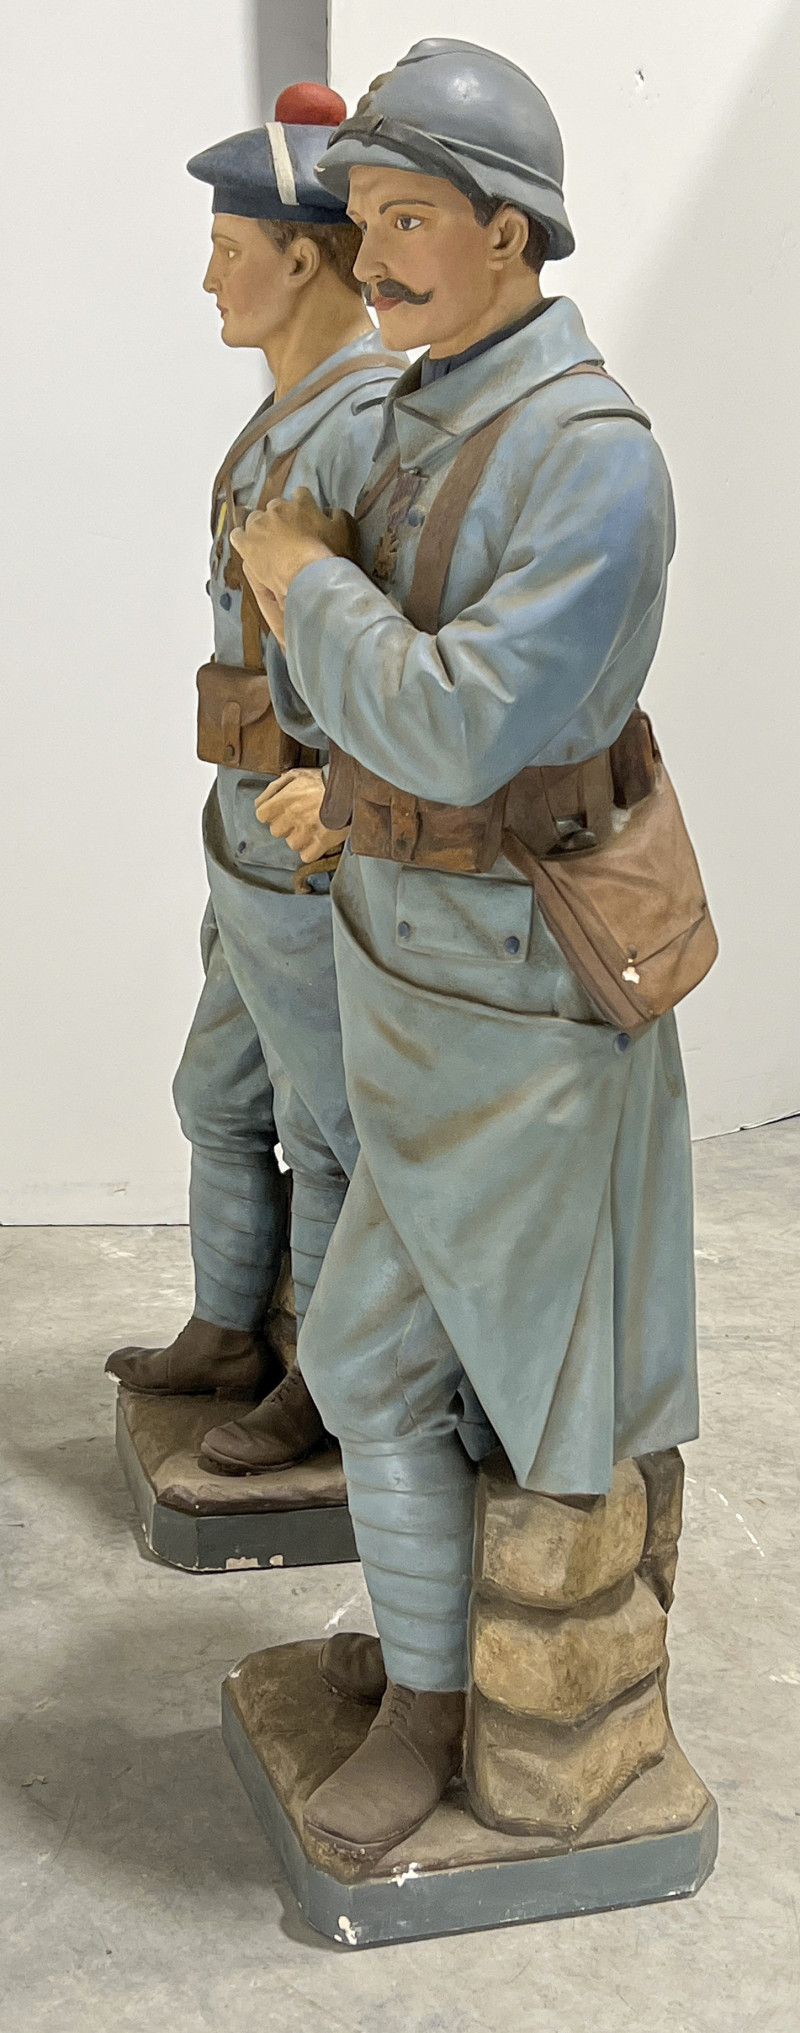 2 Near Life-Size Sculptures of Soldiers